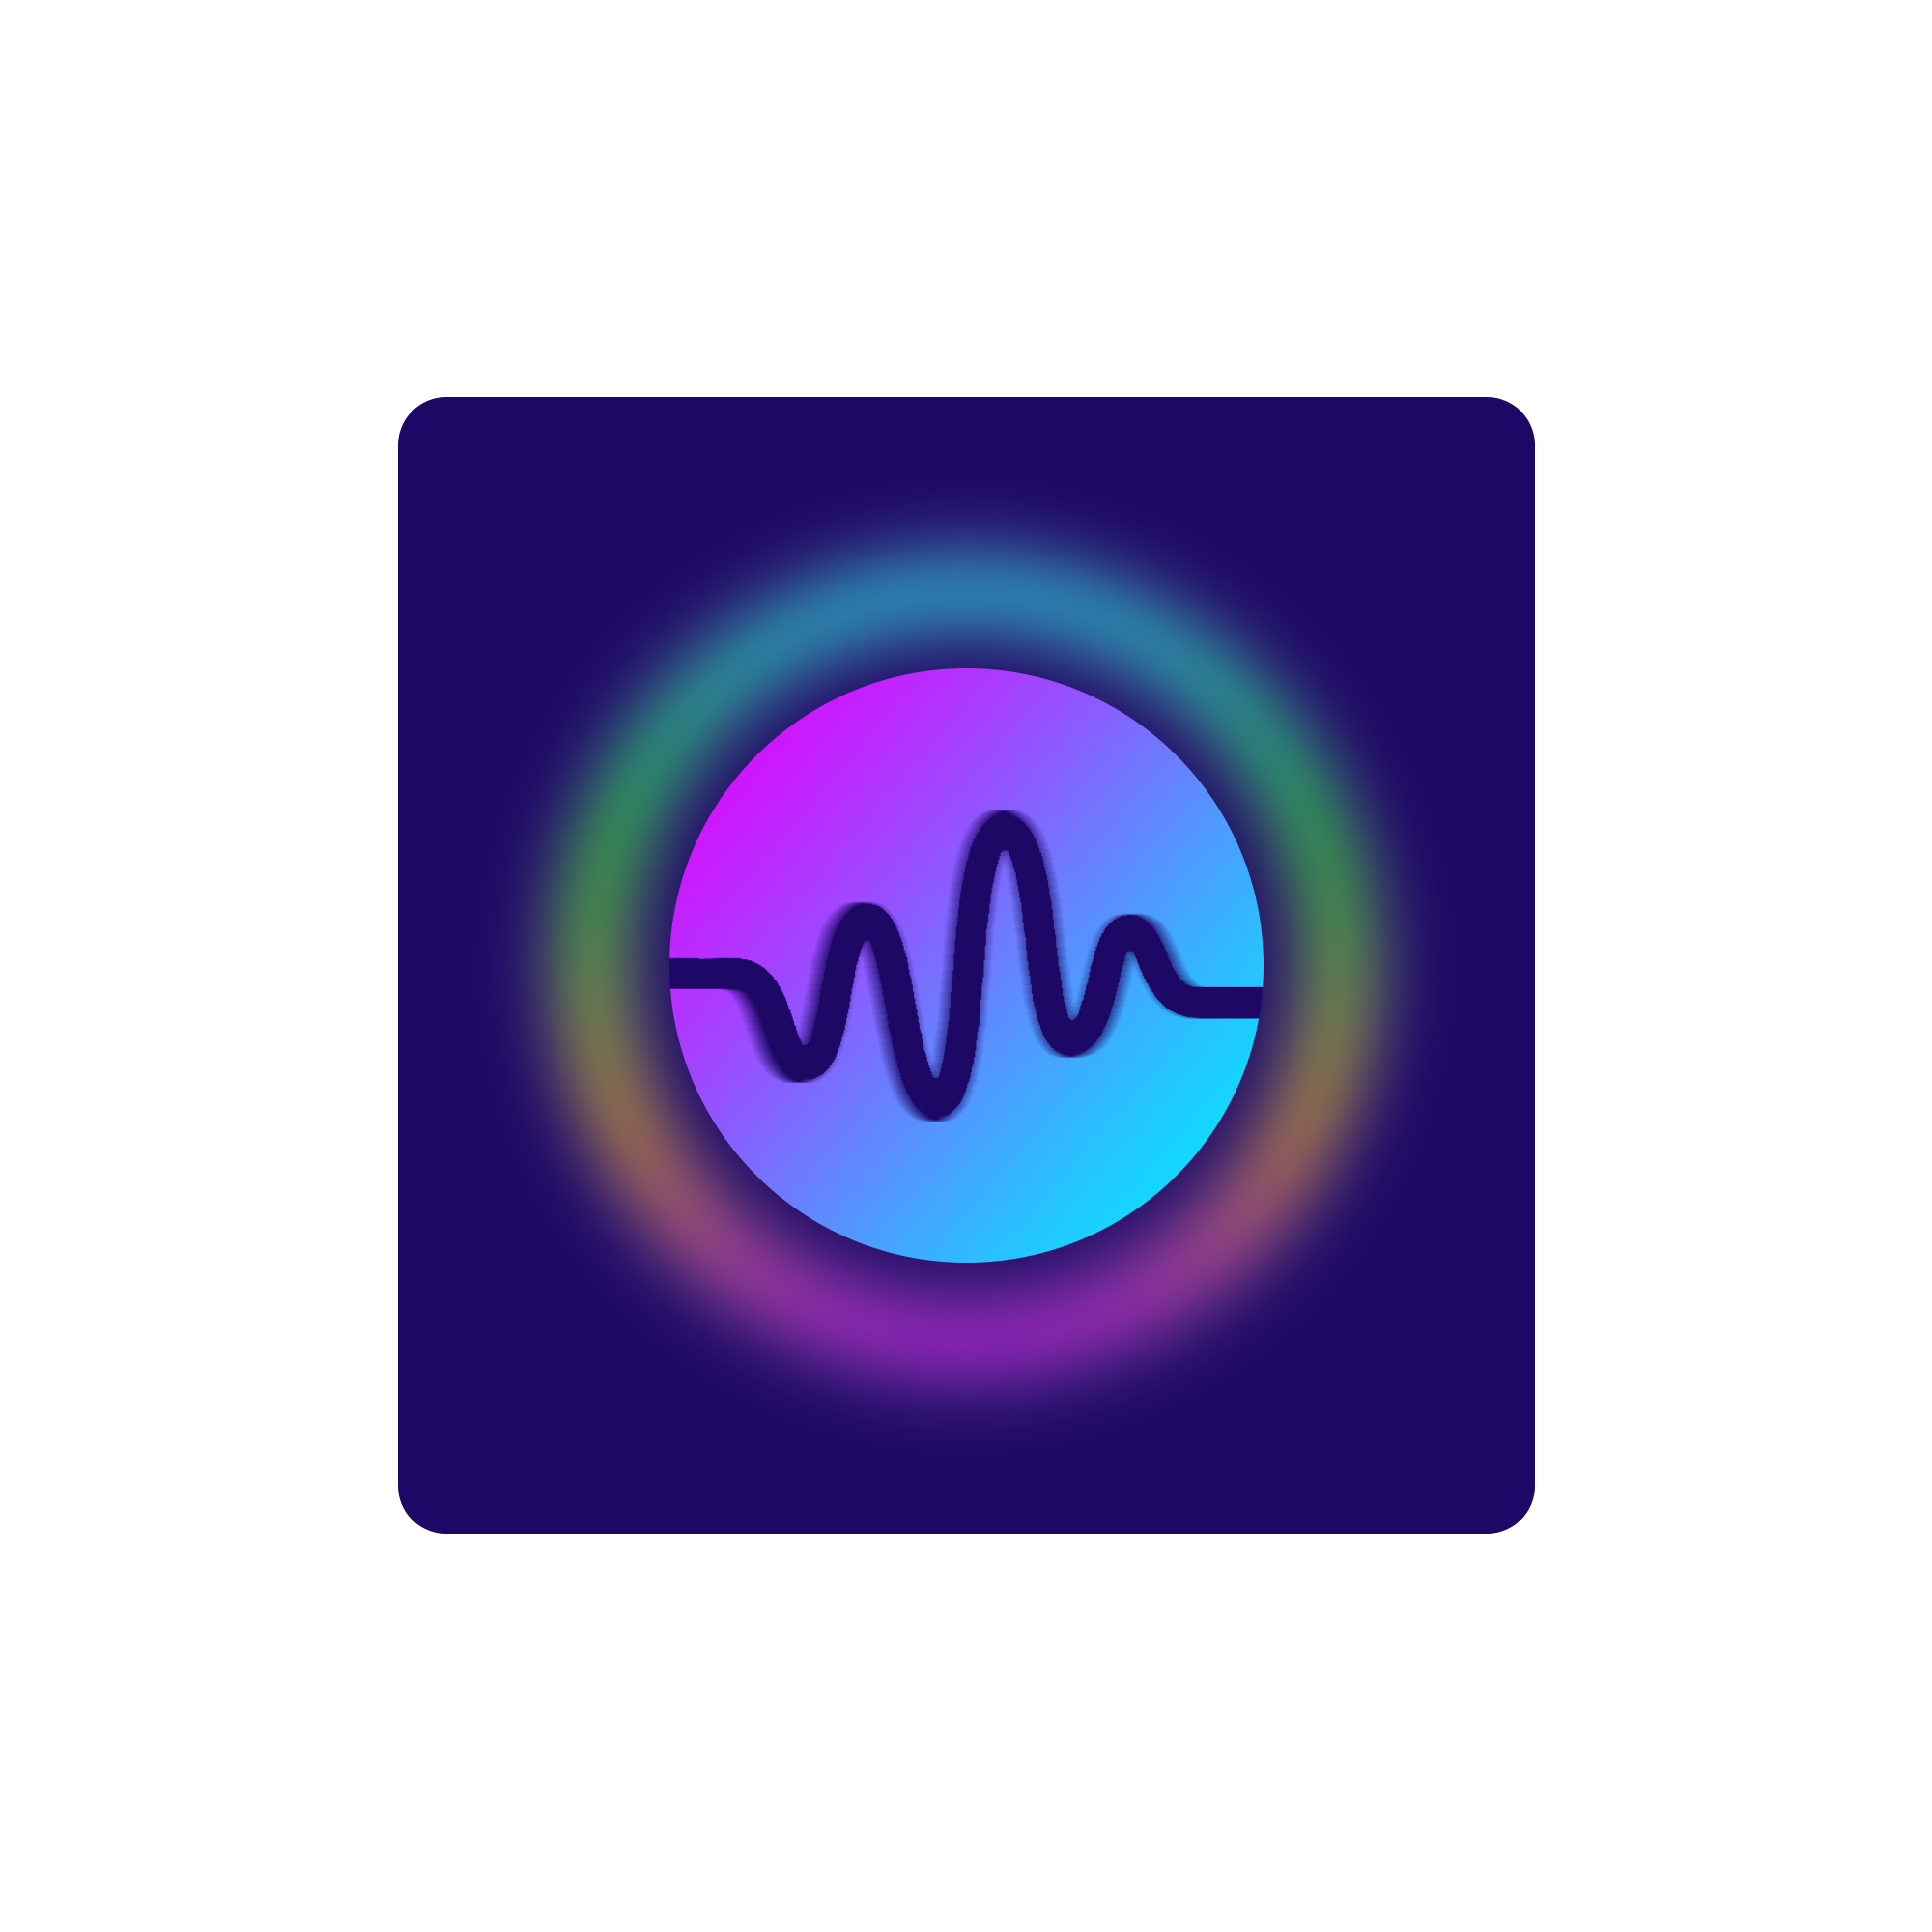 Attuned Widget Logo. A logo that I designed for my final major project app, Attuned. The bright ring of colours around the main element matches the pantones of the spotlights used within the app. The sound wave in the centre symbolises that this is an app based around music. This image was created using Adobe Photoshop.